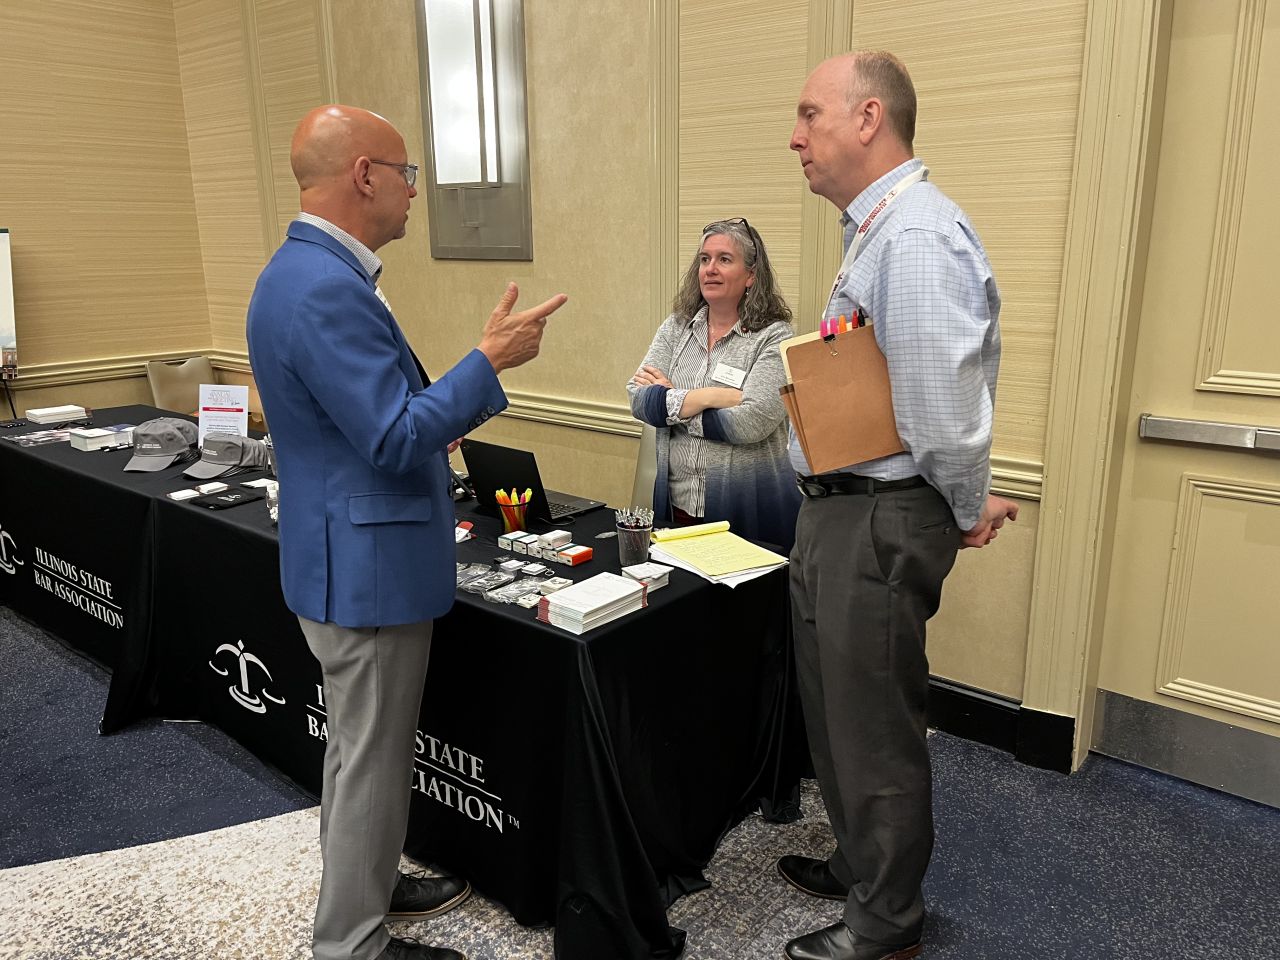 ISBA Past President Shawn Kasserman visits the ISBA Member Services booth